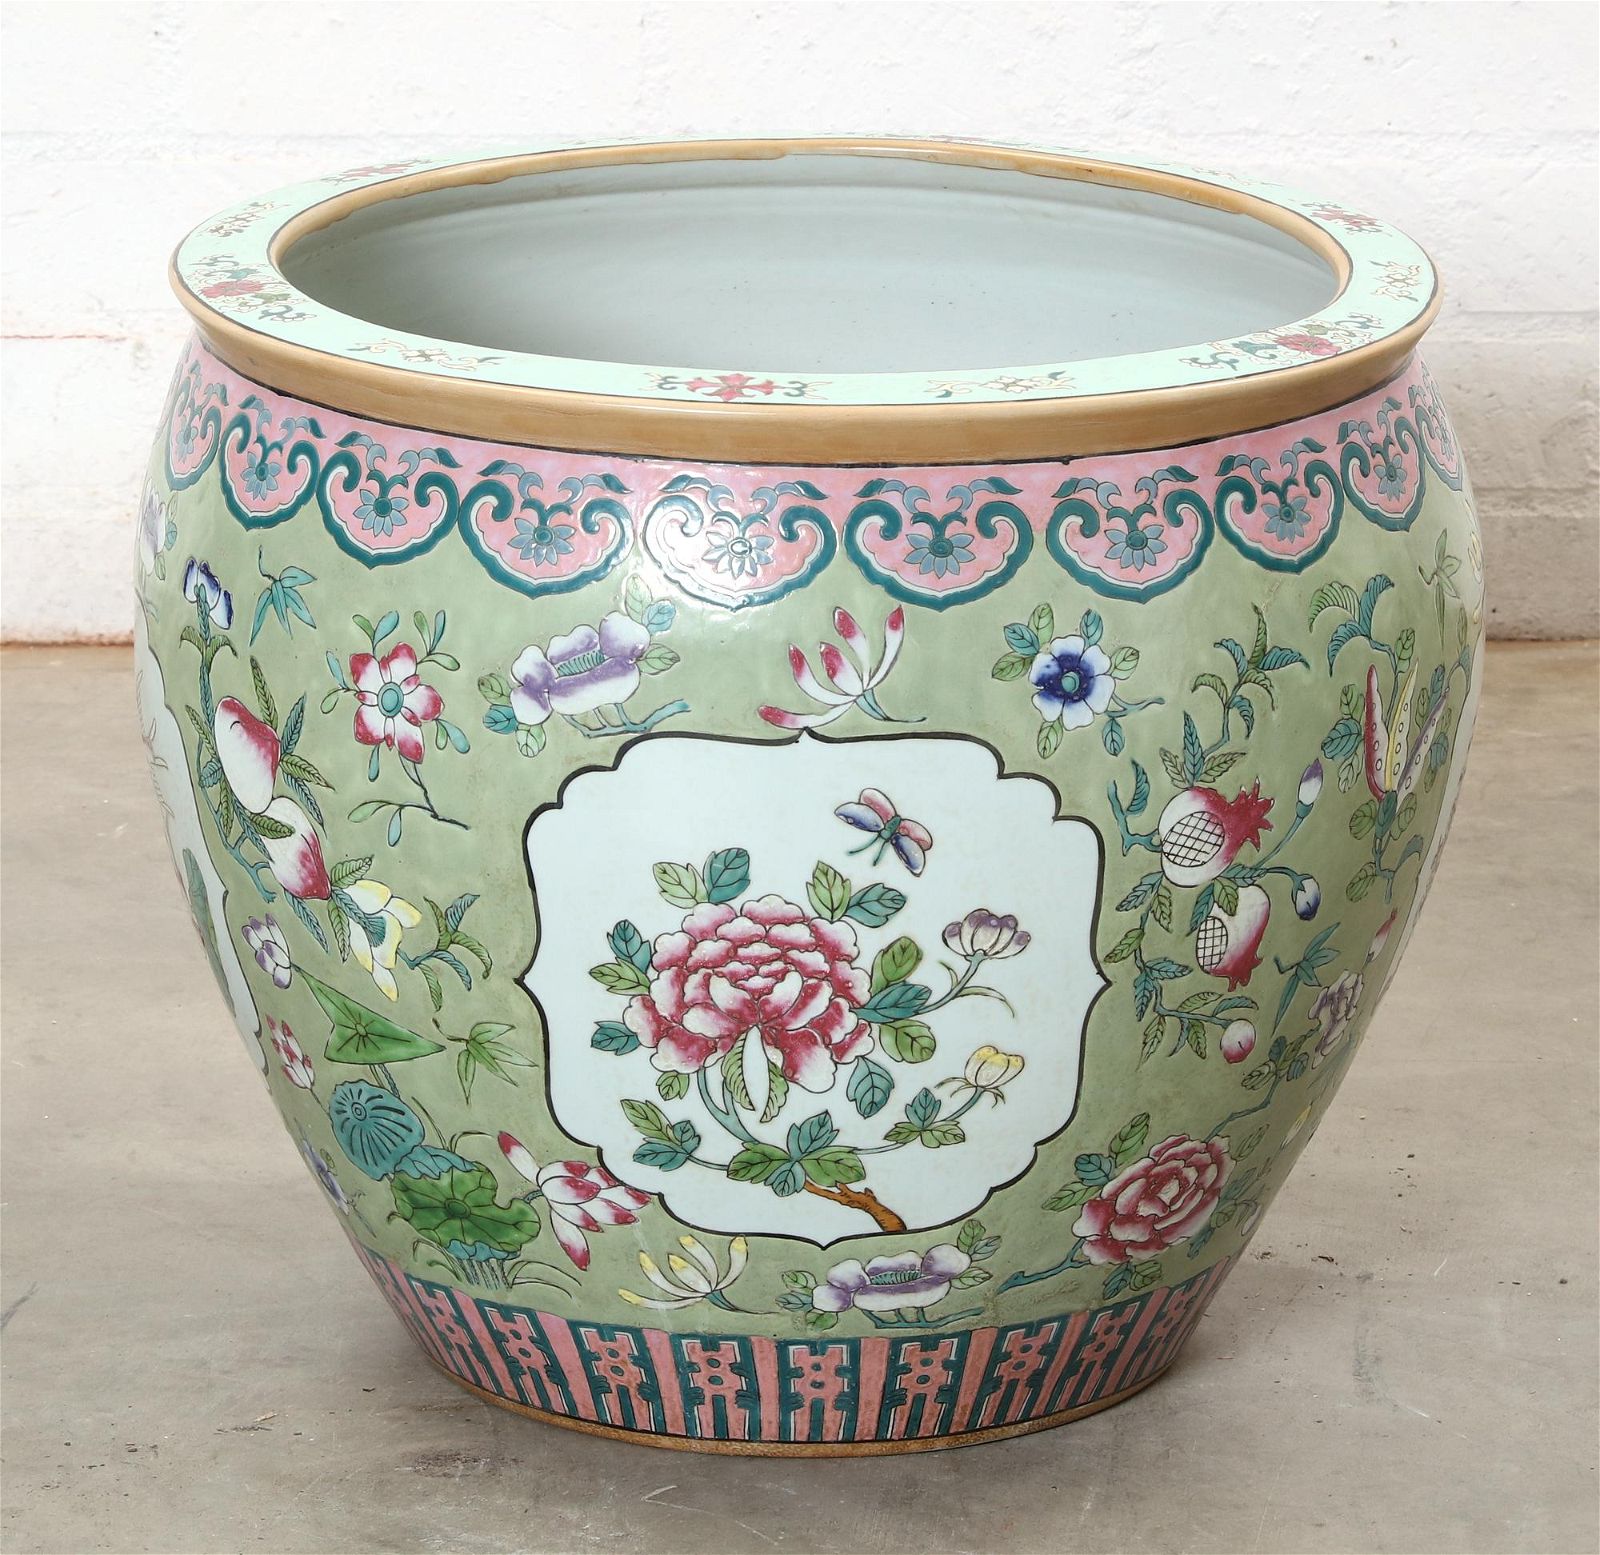 A CHINESE FAMILLE ROSE PORCELAIN 2fb2a70